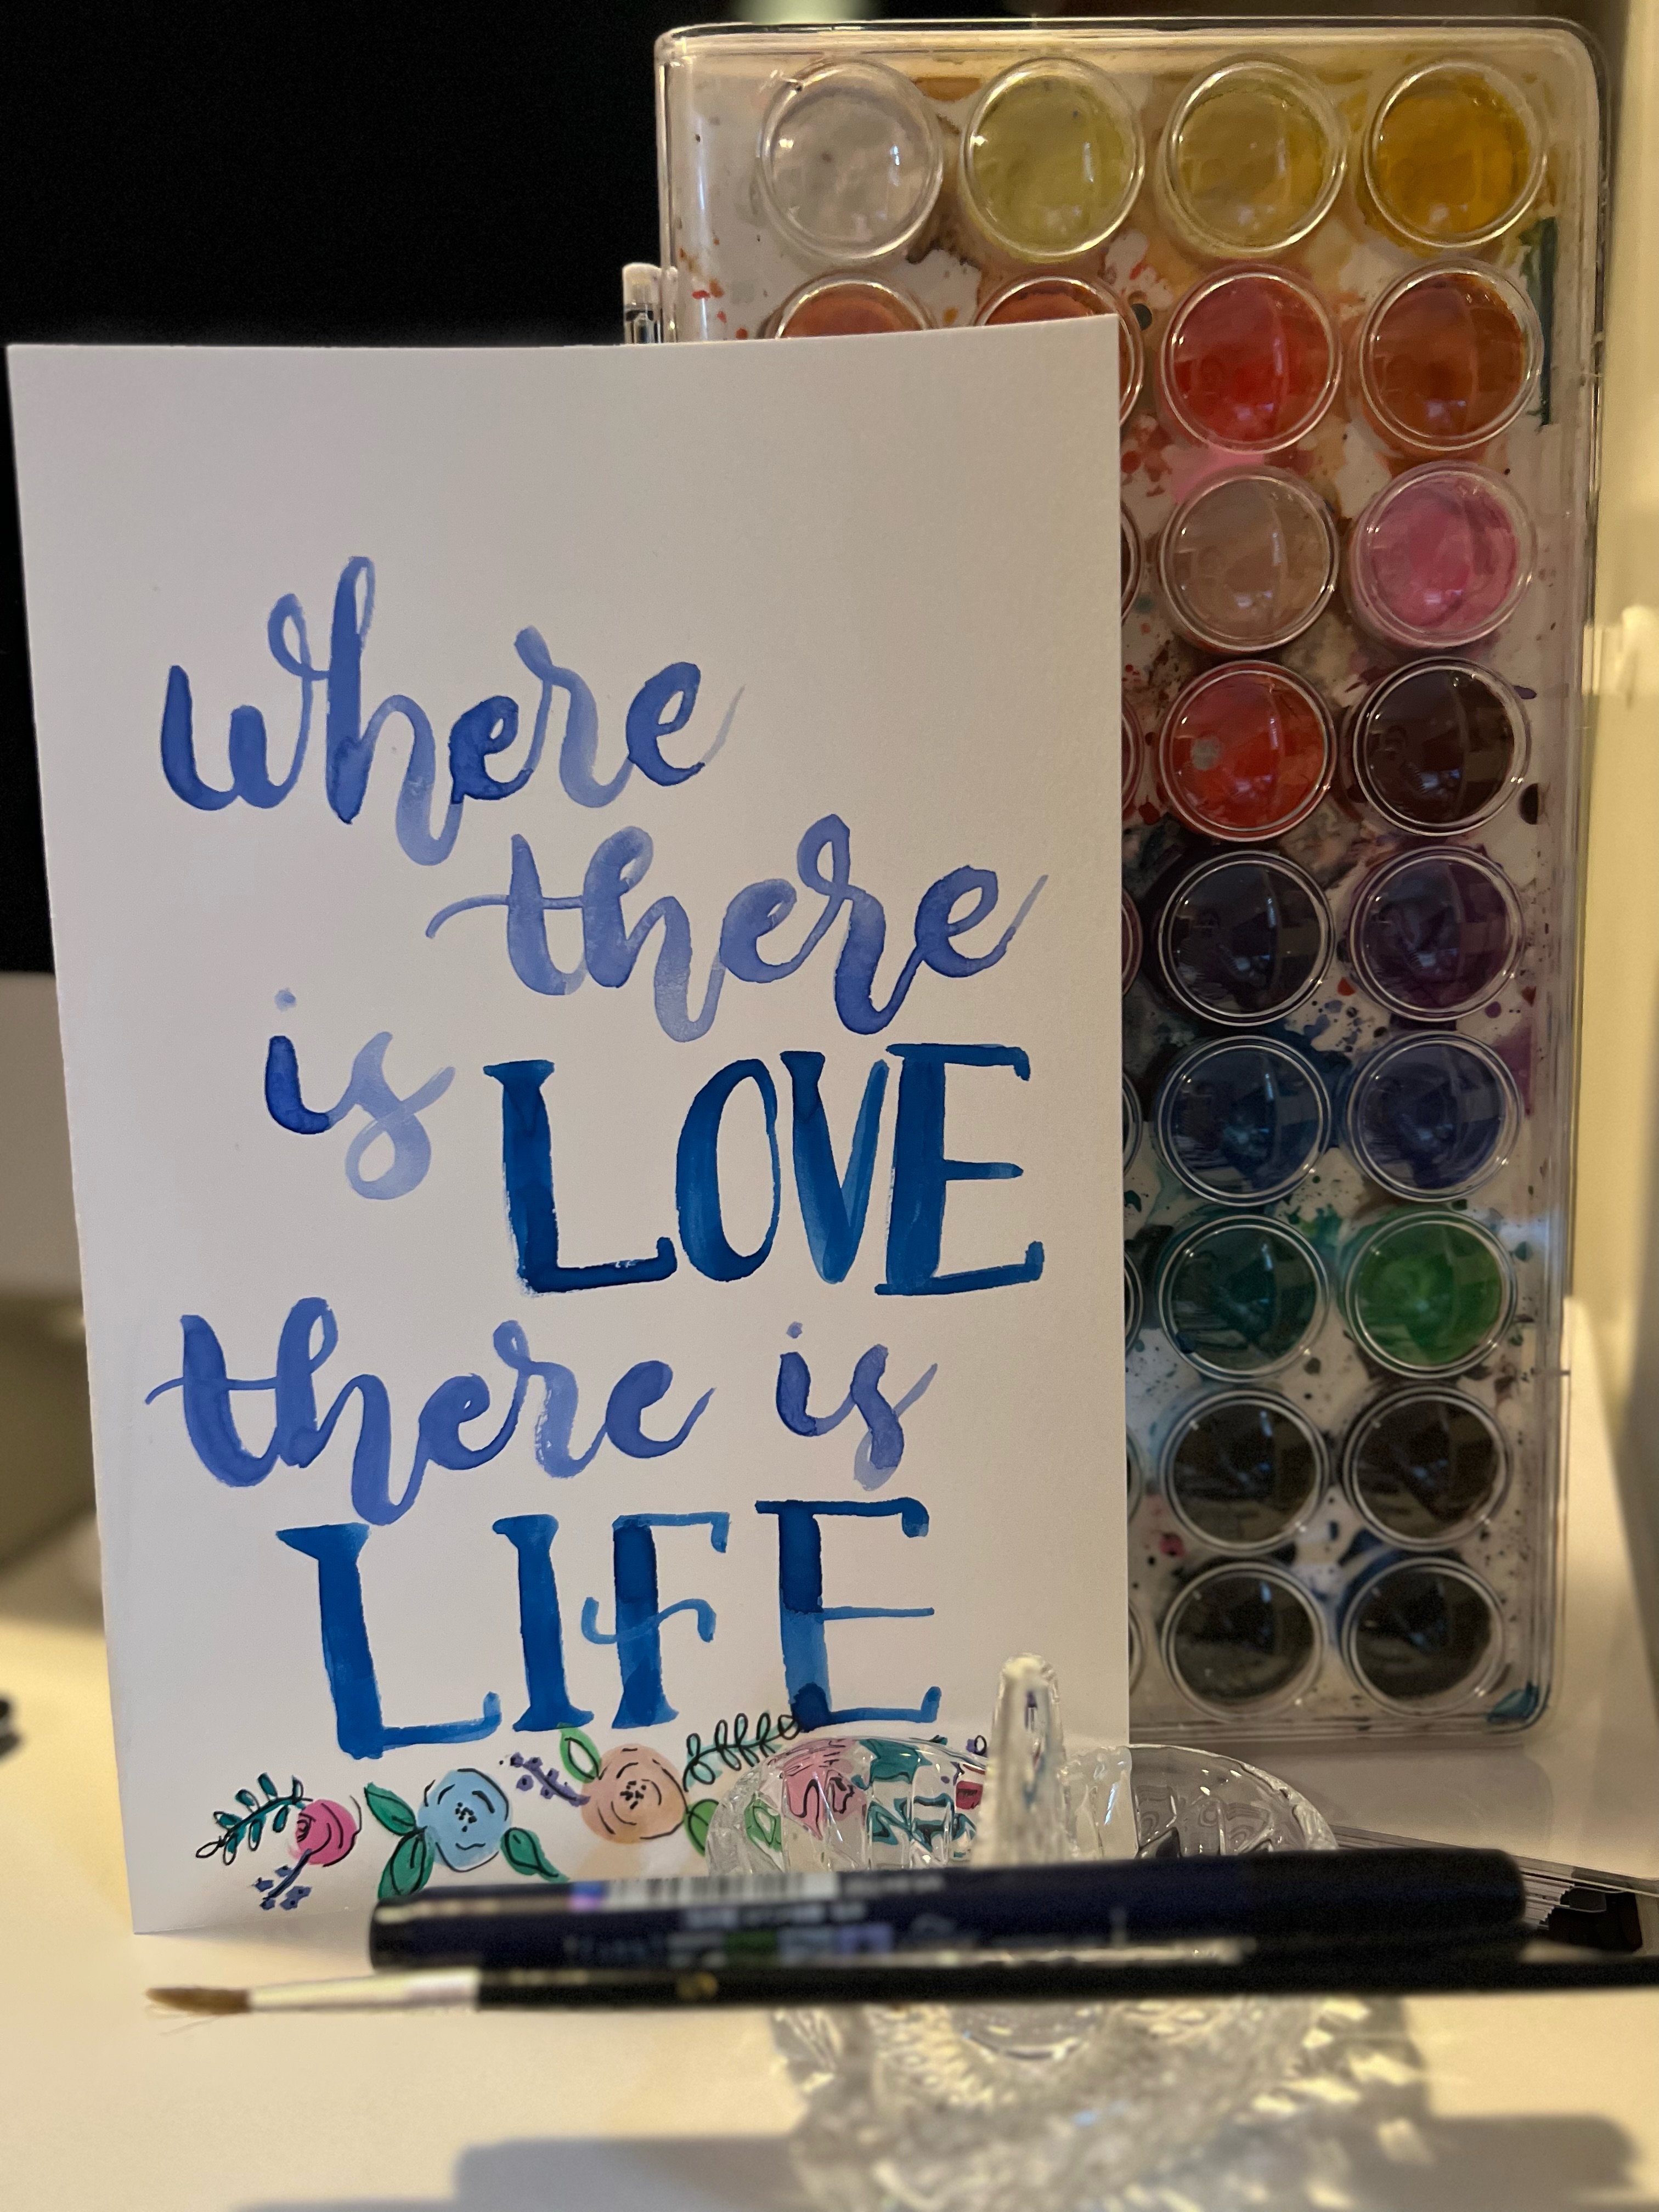 White card with blue watercolor writing that says "Where there is love there is life" with small watercolor painted flowers at bottom.